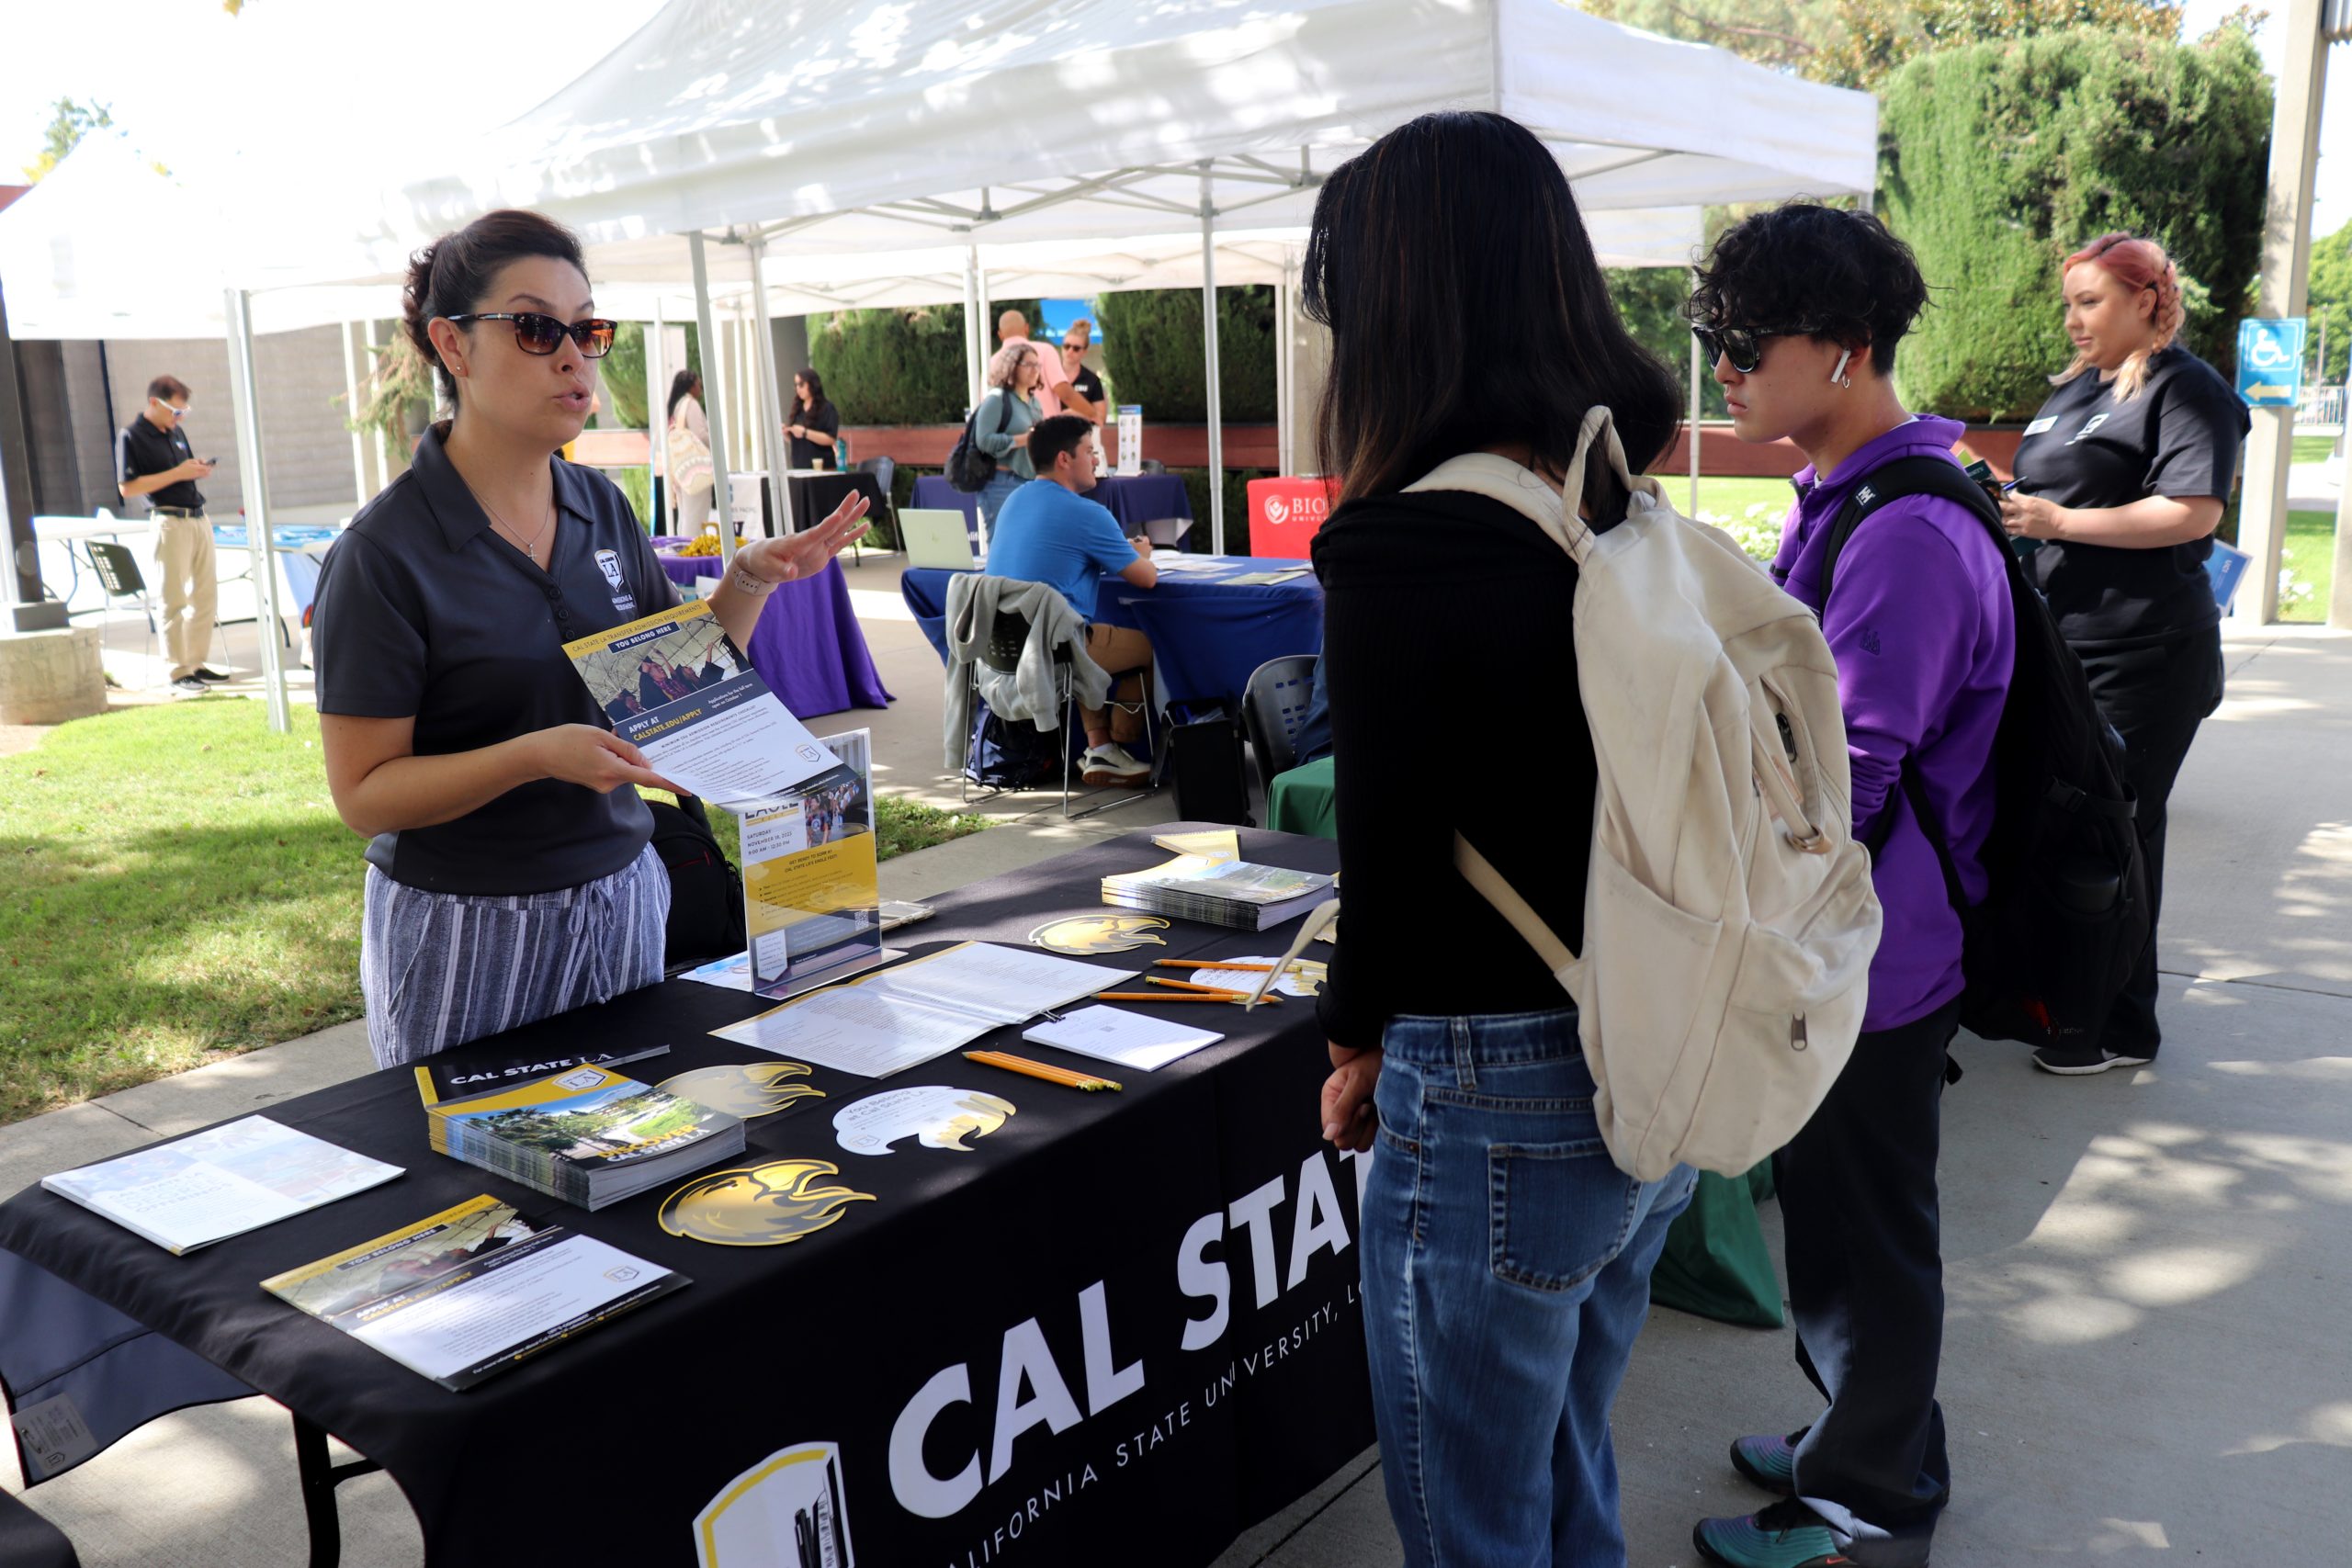 Transfer fair: Students get their questions answered by different university representatives